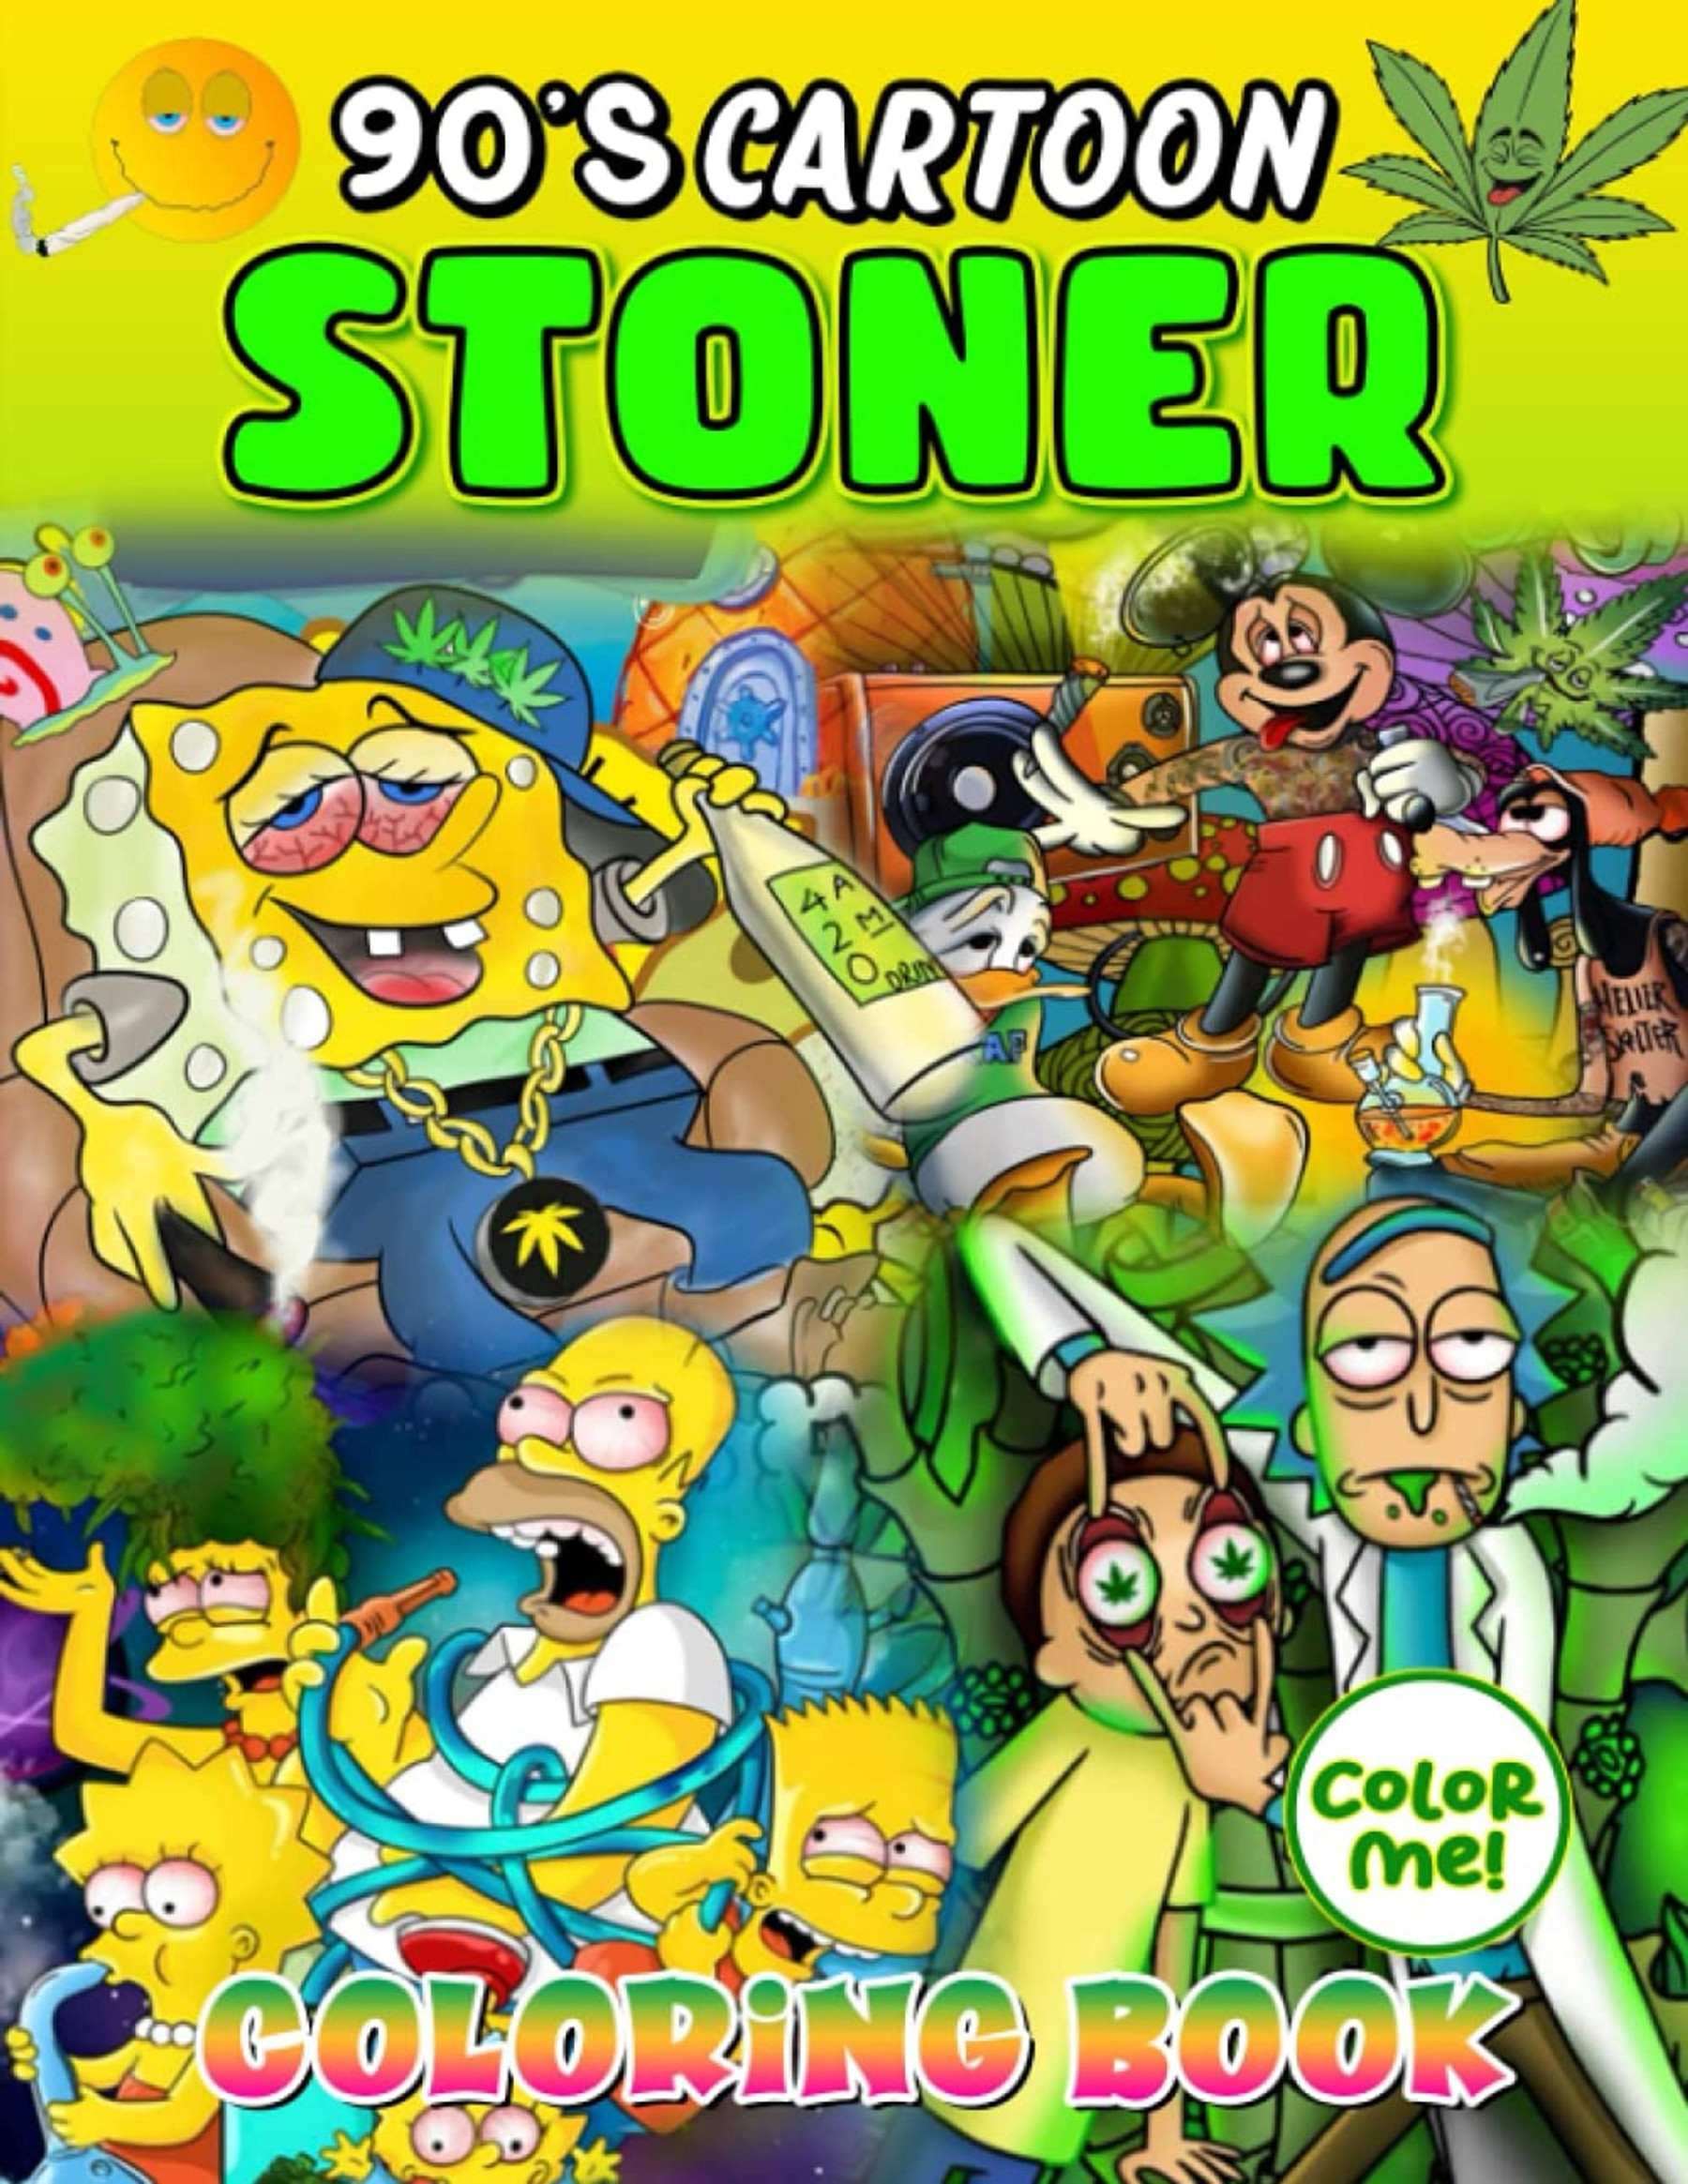 Color Me! - s Cartoon Stoner Coloring Book Full of Psychedelic Trippy  Premium Illustrated Pages For Adults To Relax And Get High